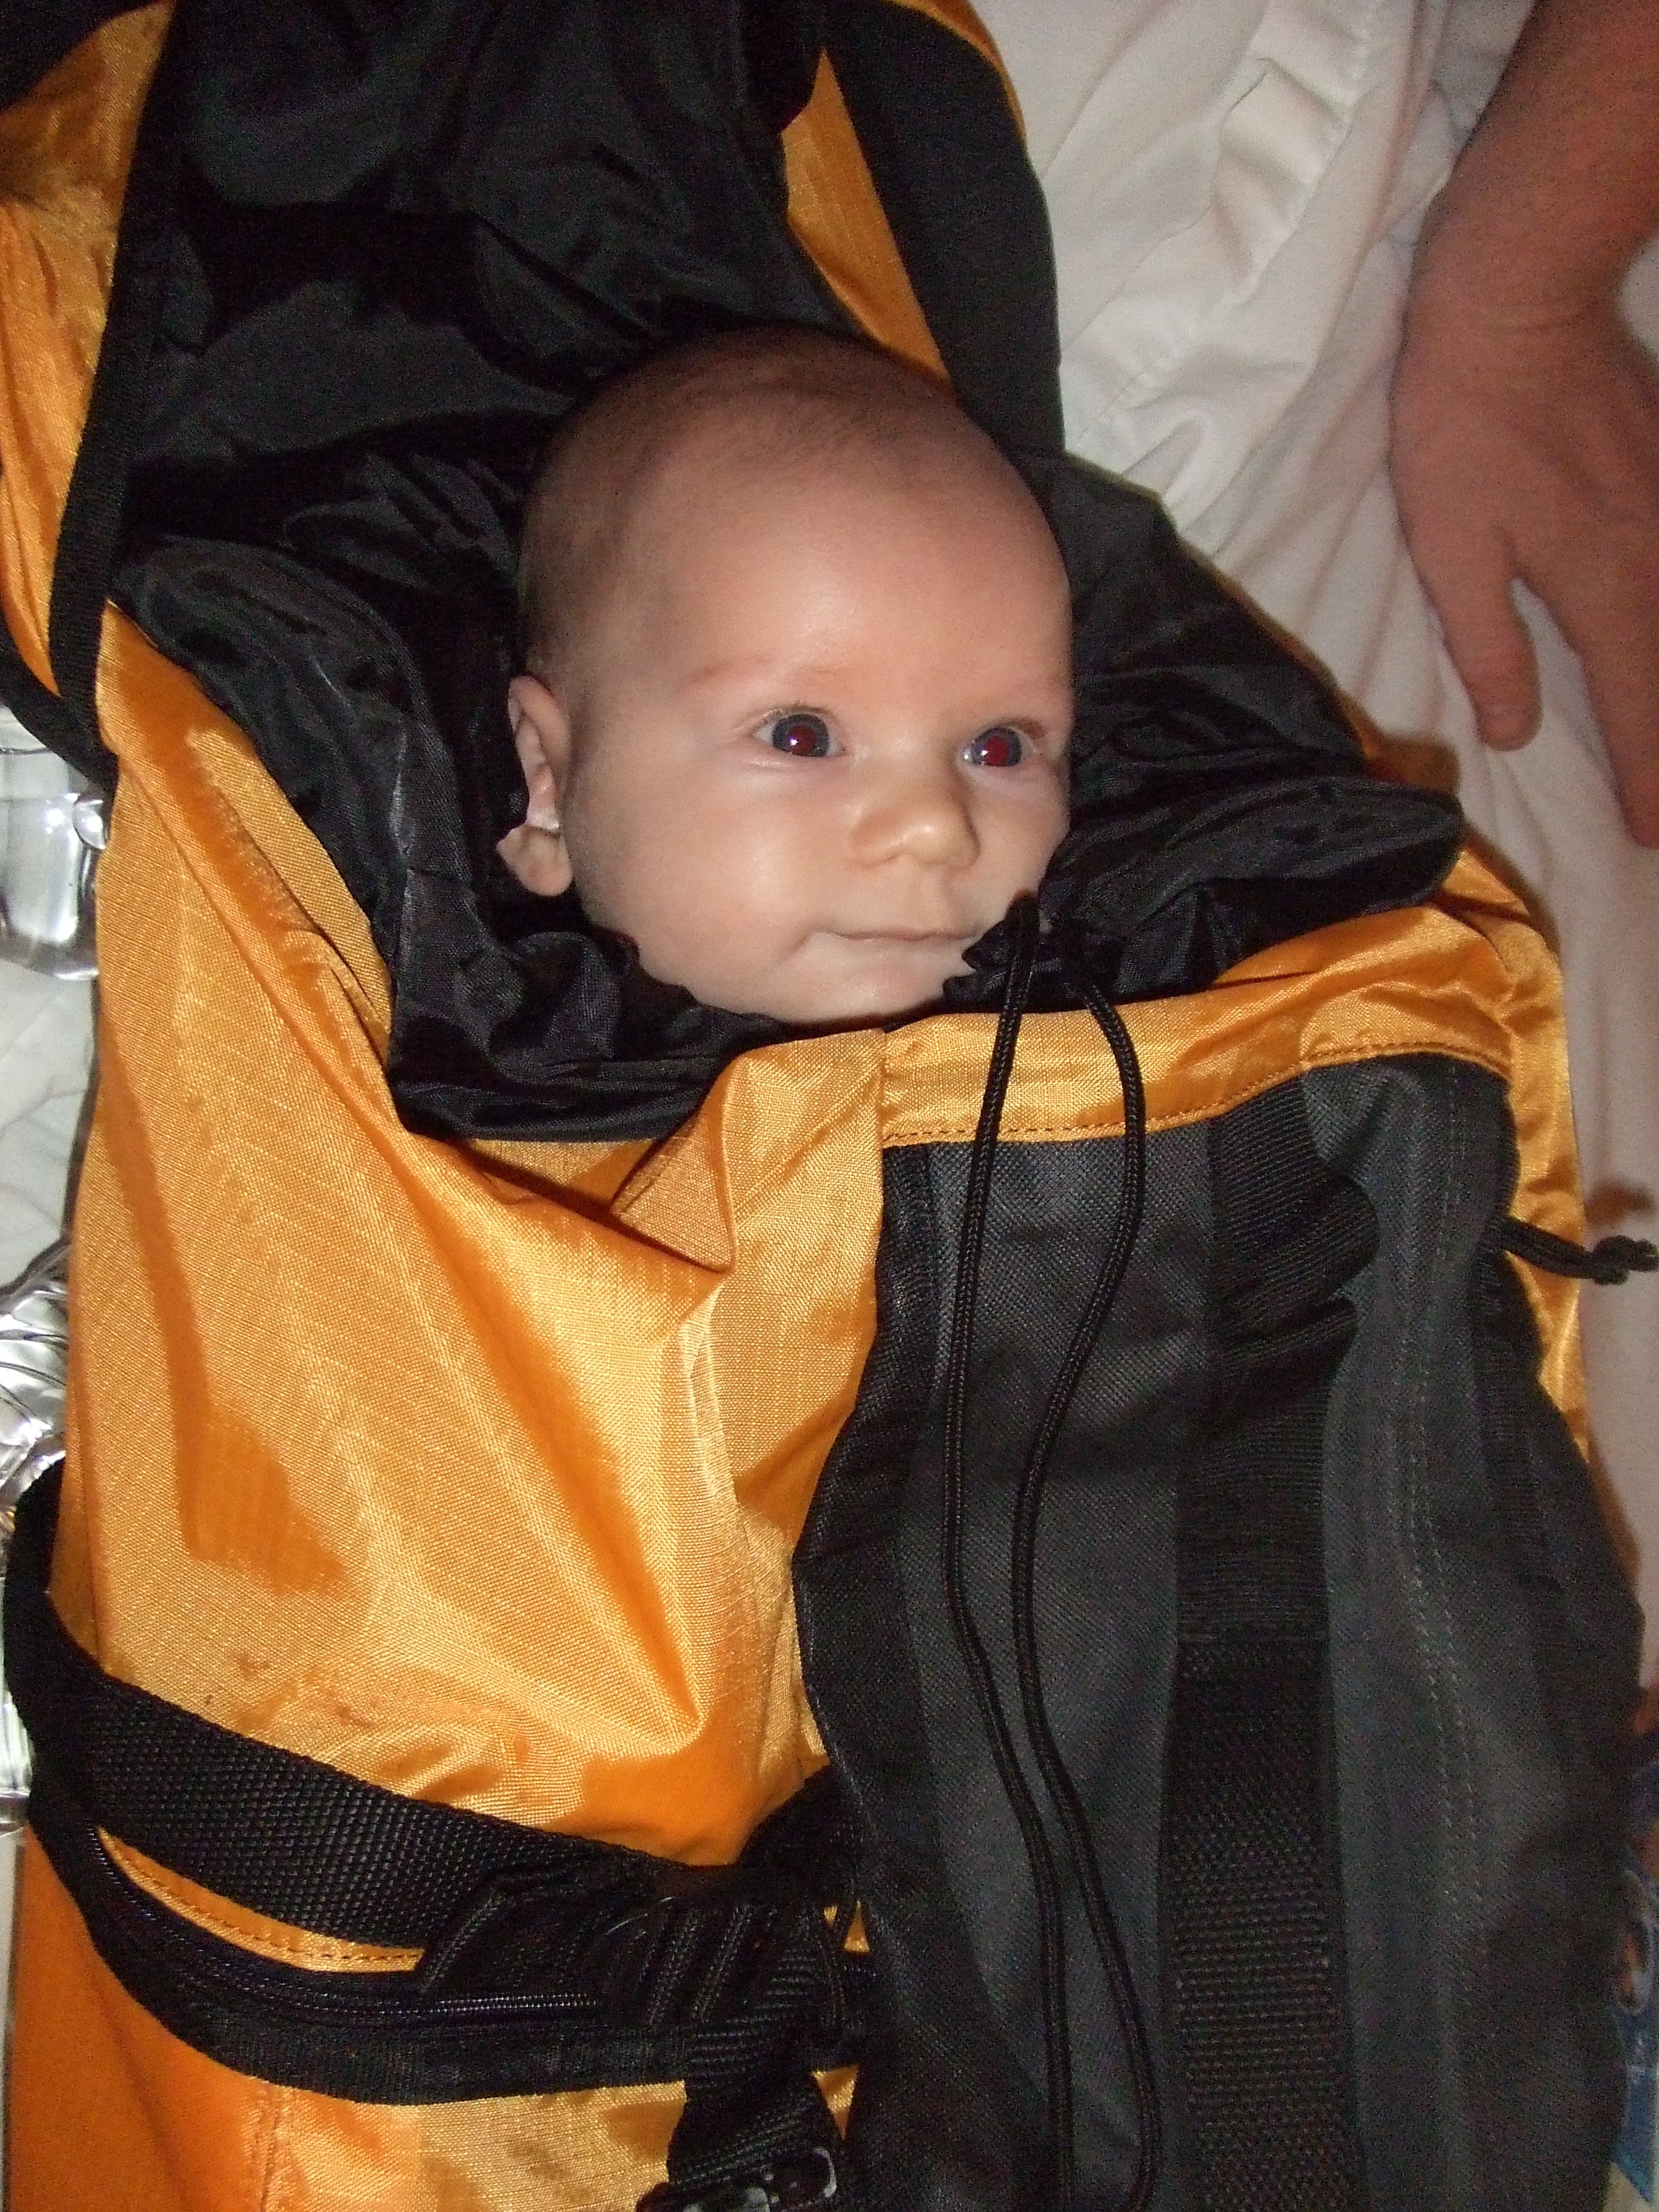 Backpack baby